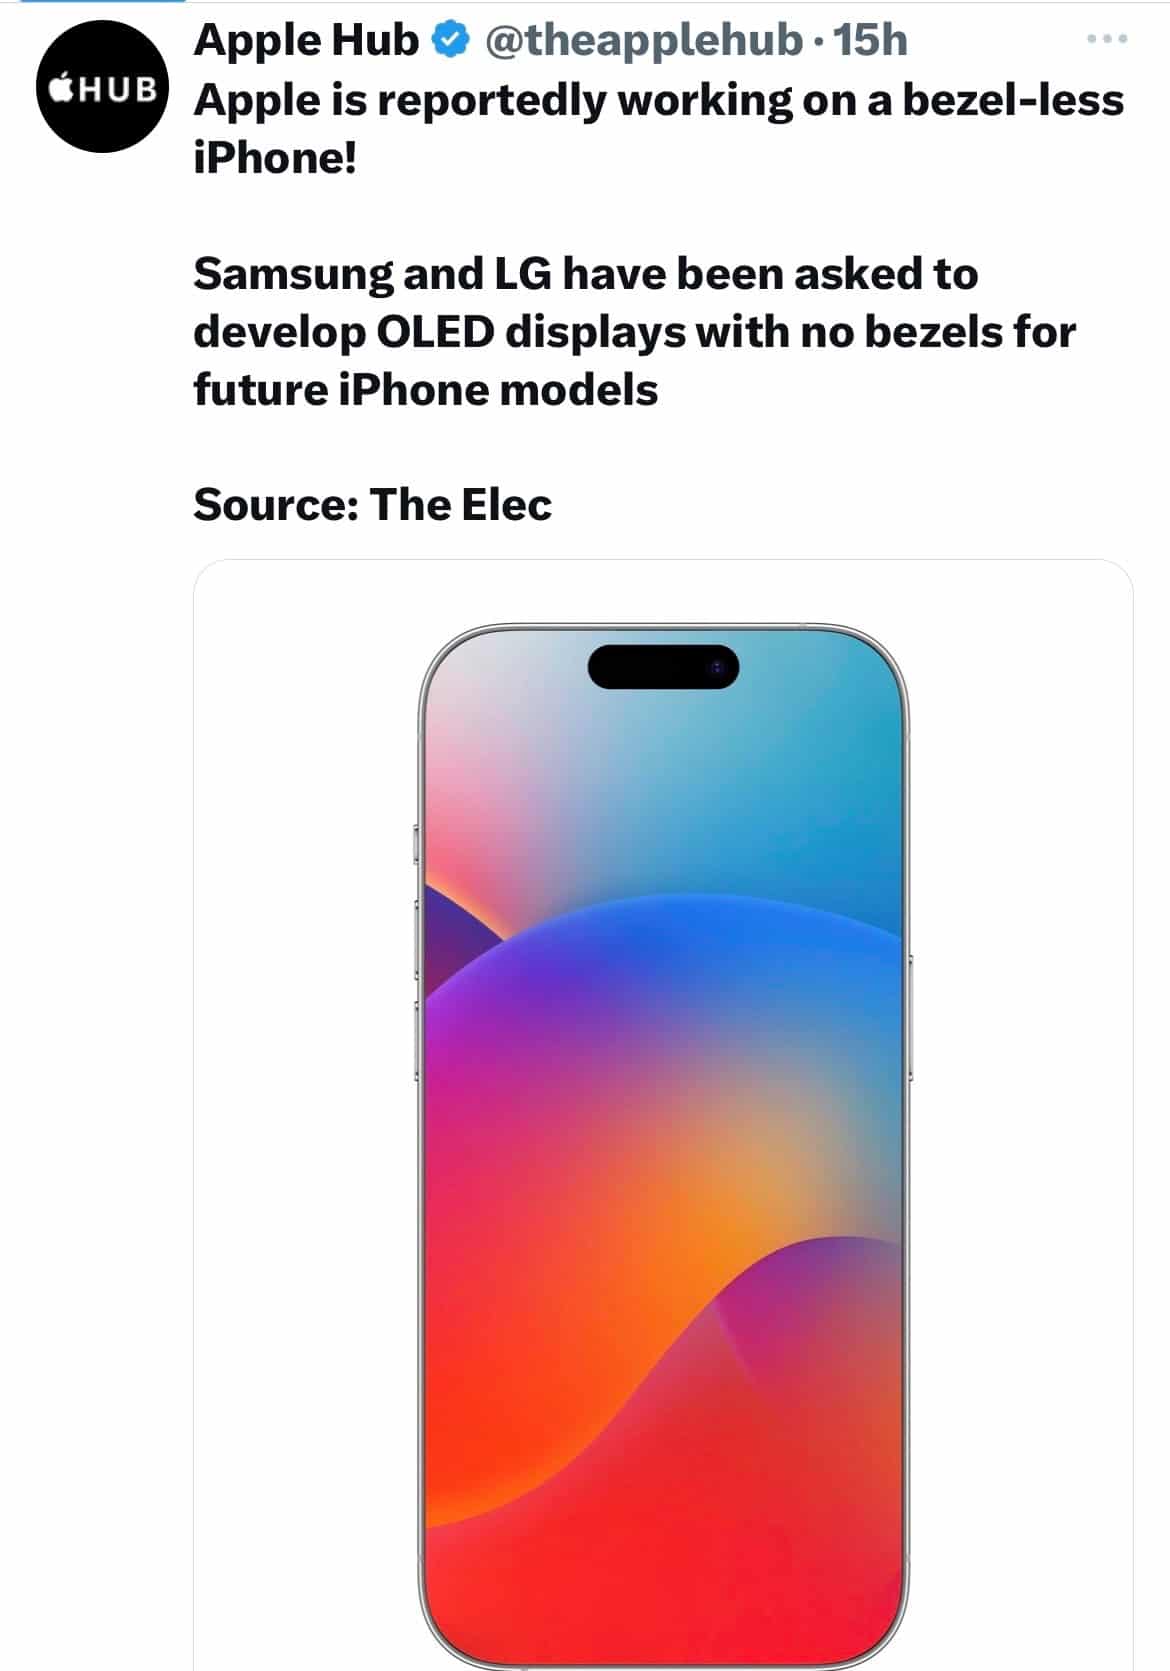 Apple iPhone Bezels-Smaller or No More